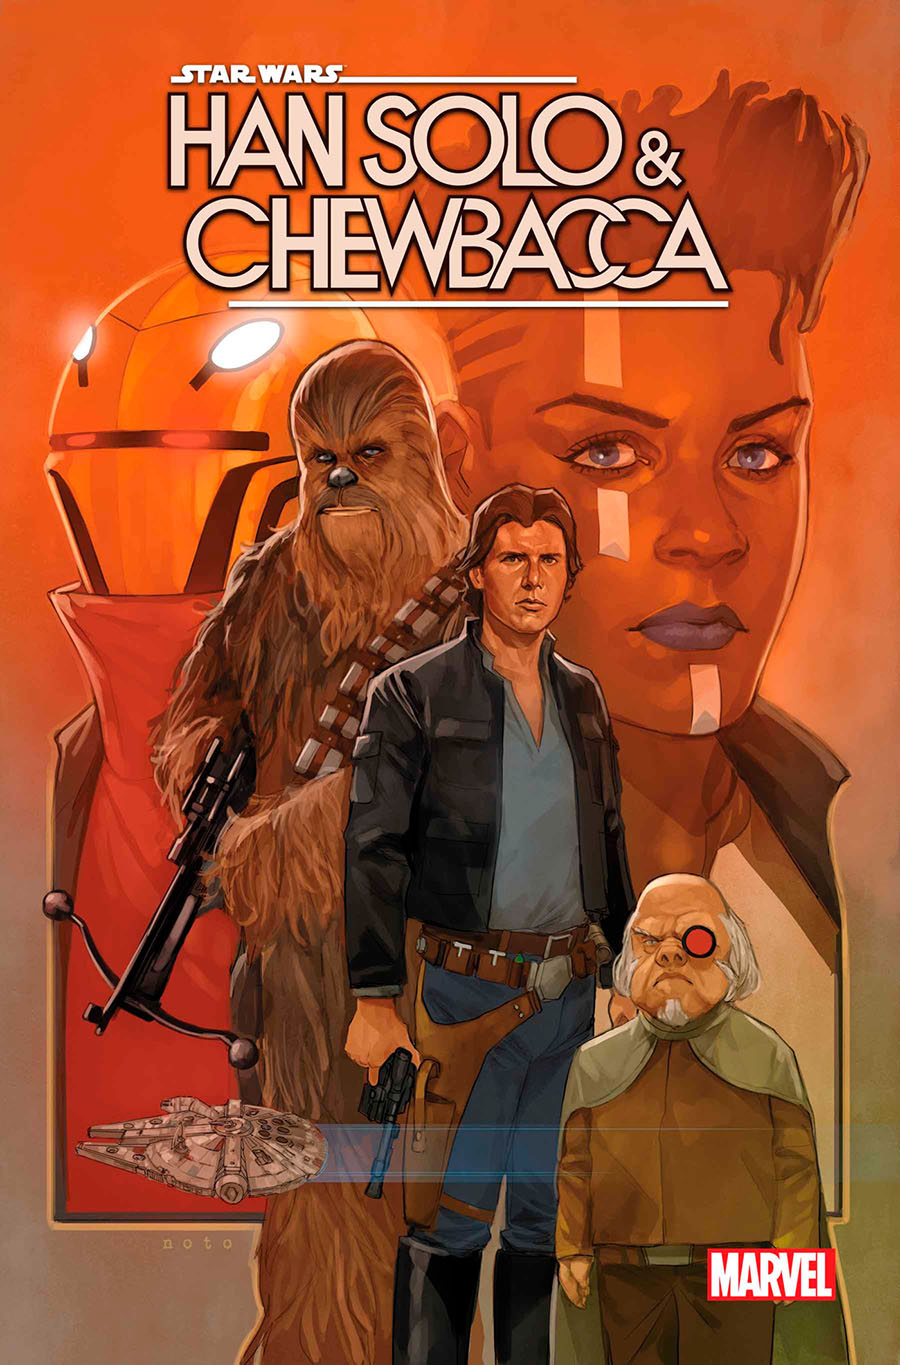 Star Wars Han Solo & Chewbacca #9 Cover A Regular Phil Noto Cover